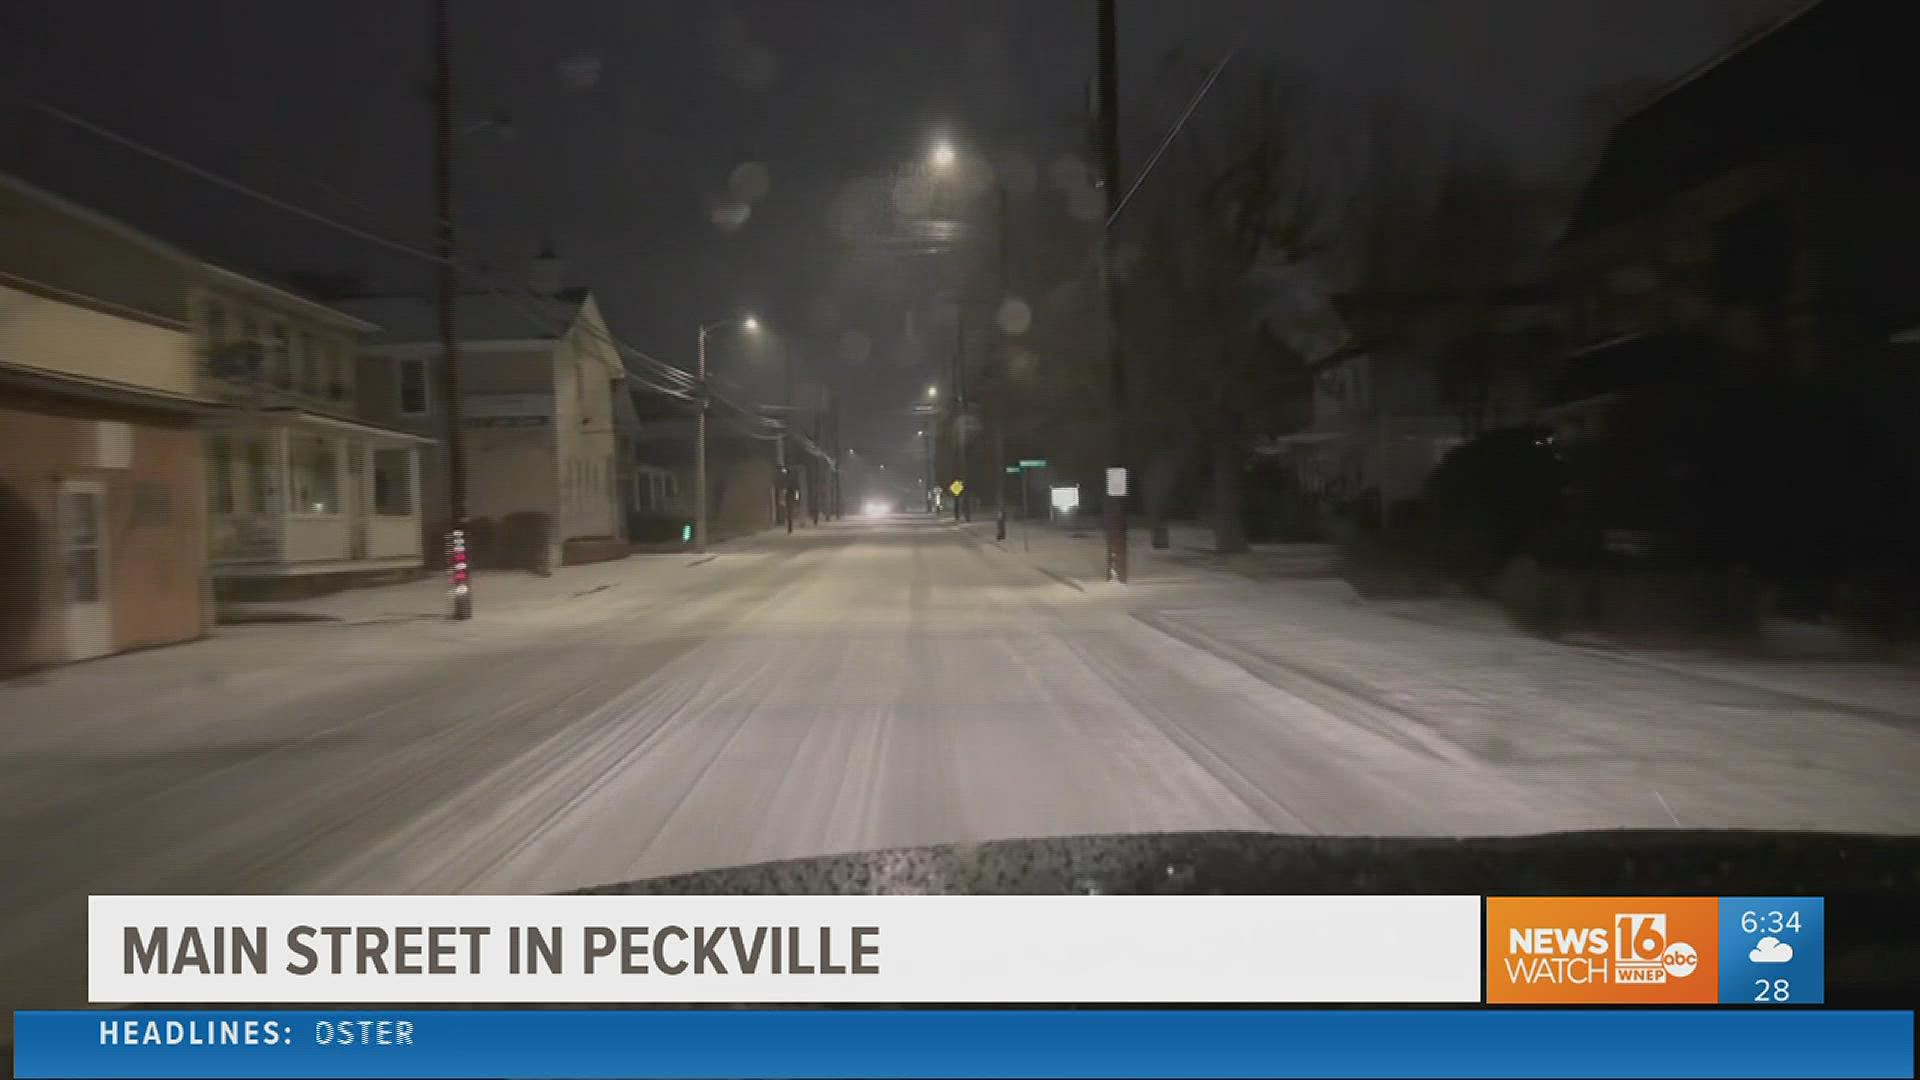 It's not just the northern tier, all of our area woke up to an icy mess Friday morning. Newswatch 16's Ryan Leckey shares some of your sights and sounds.